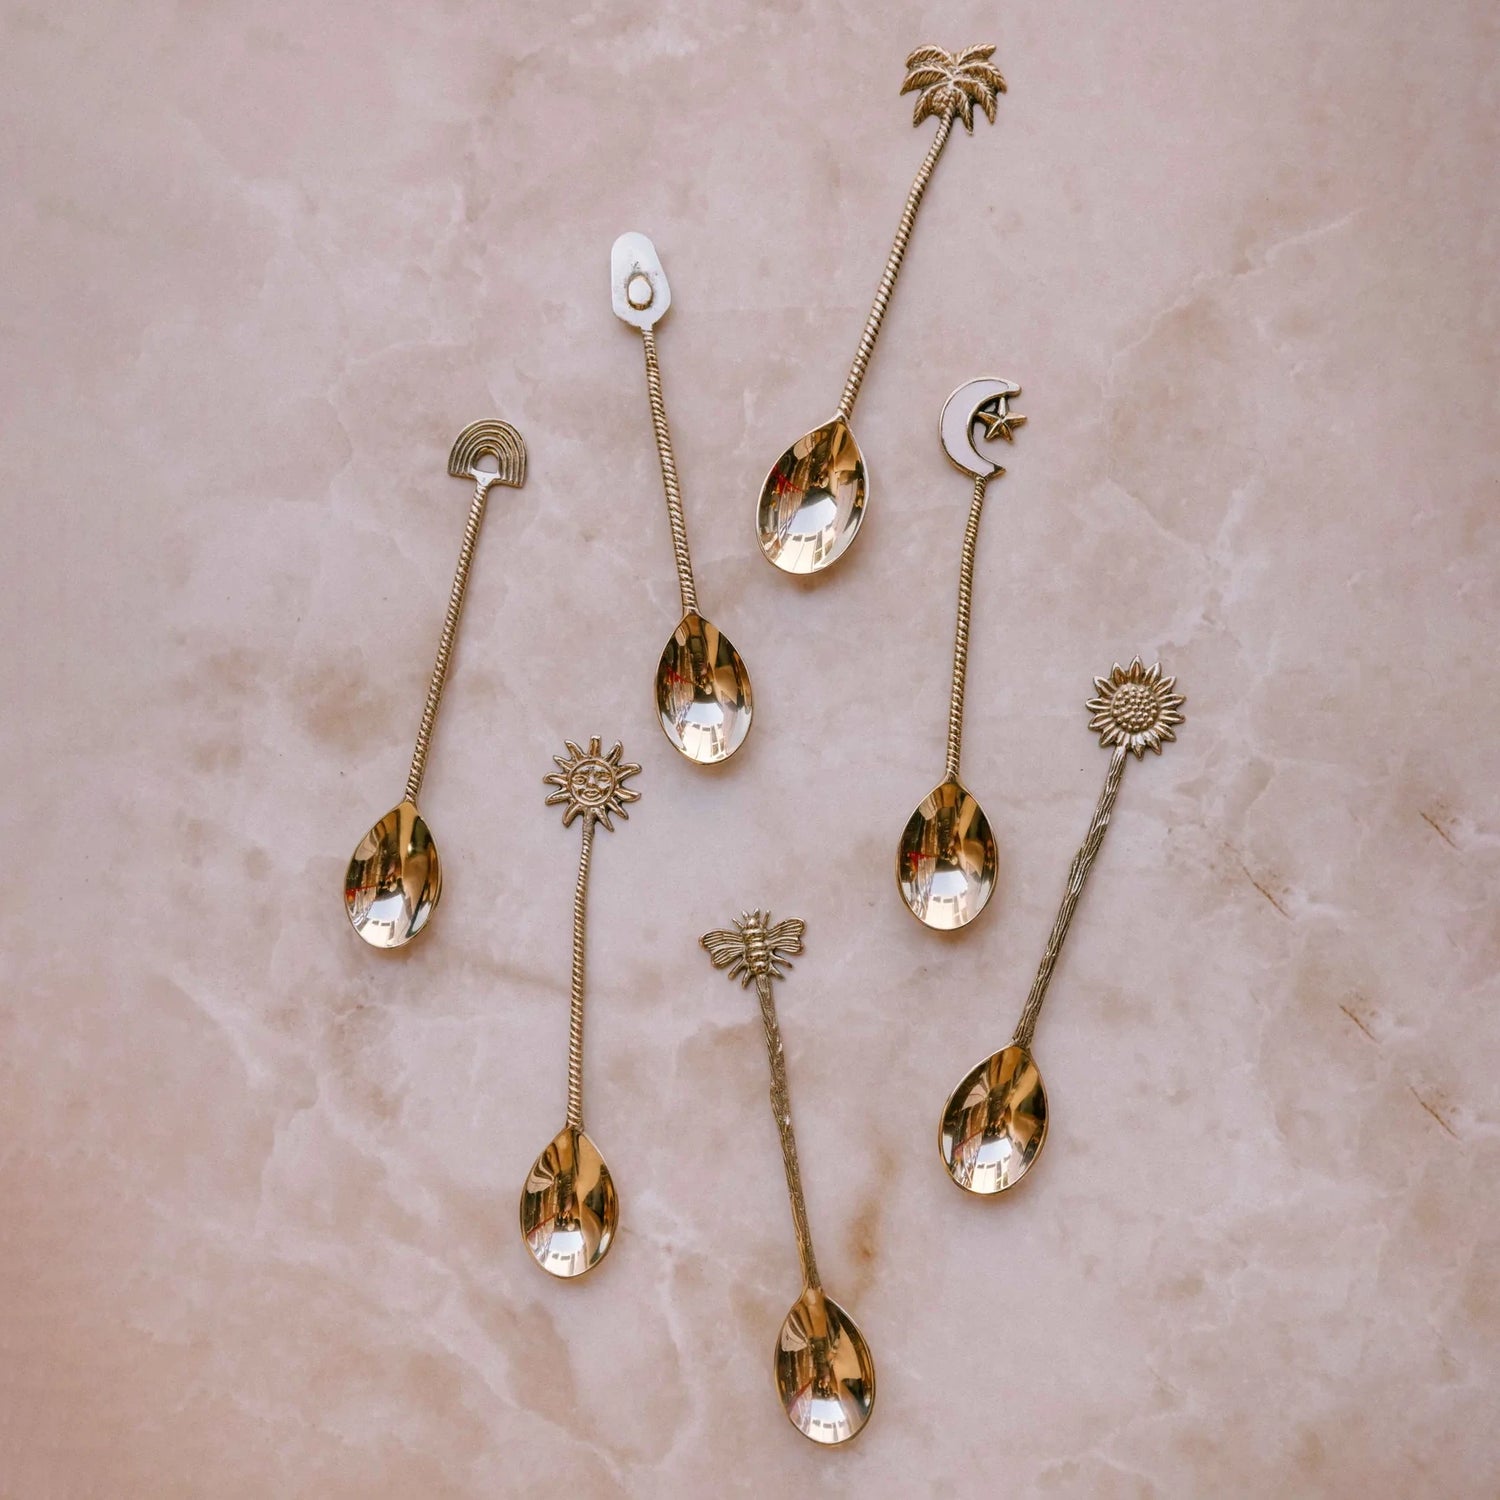 Brass Dessert Spoons by The Wholesome Store